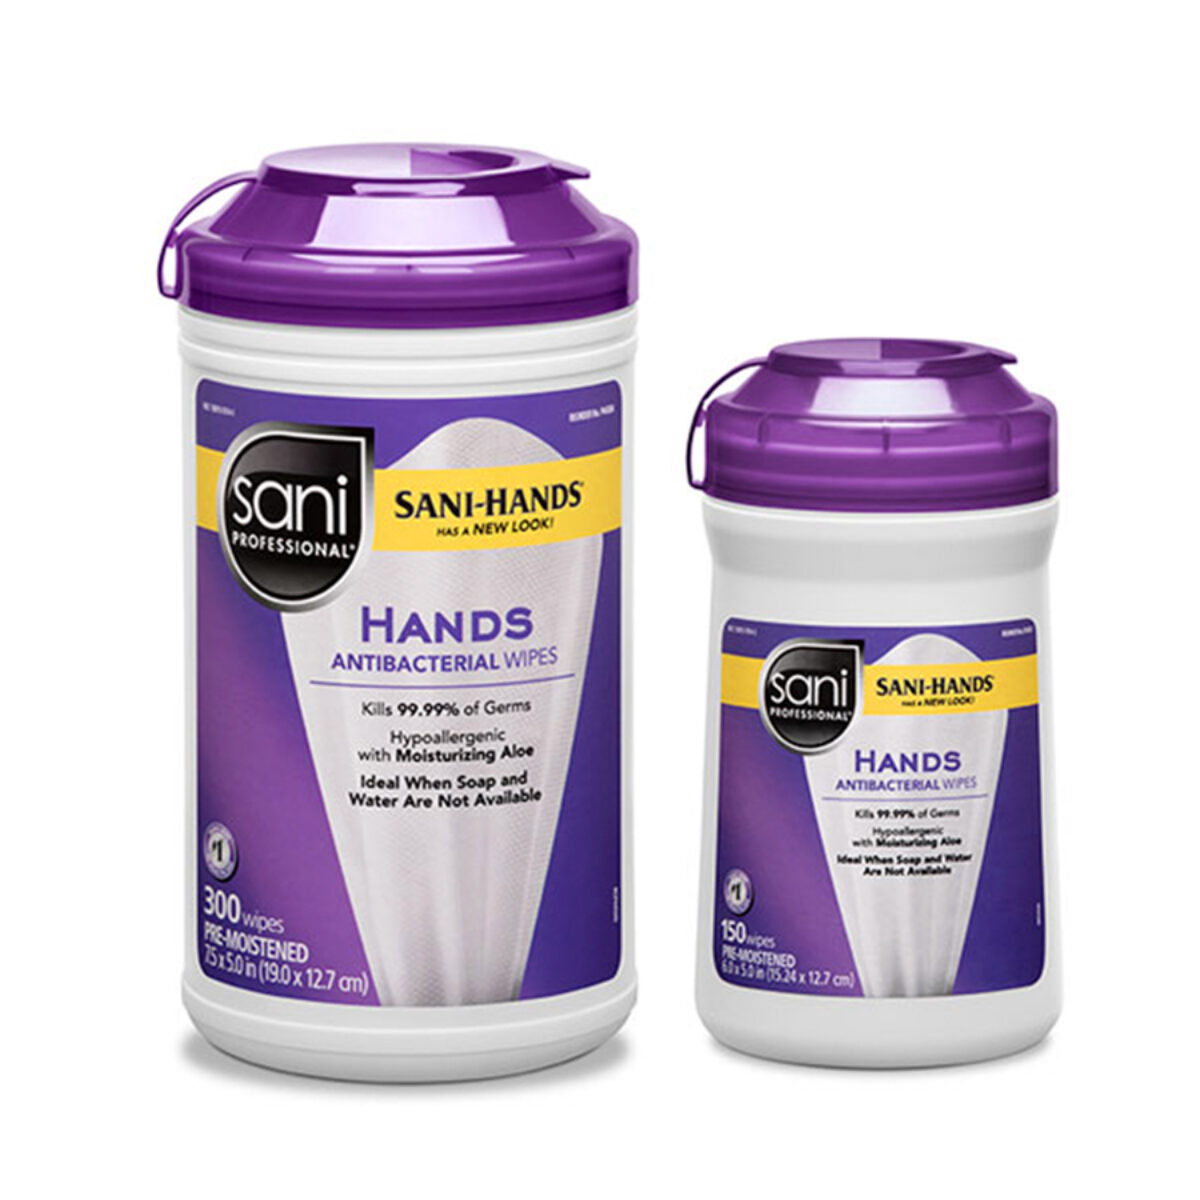 Hand sanitizer wipes Hand Sanitizers at